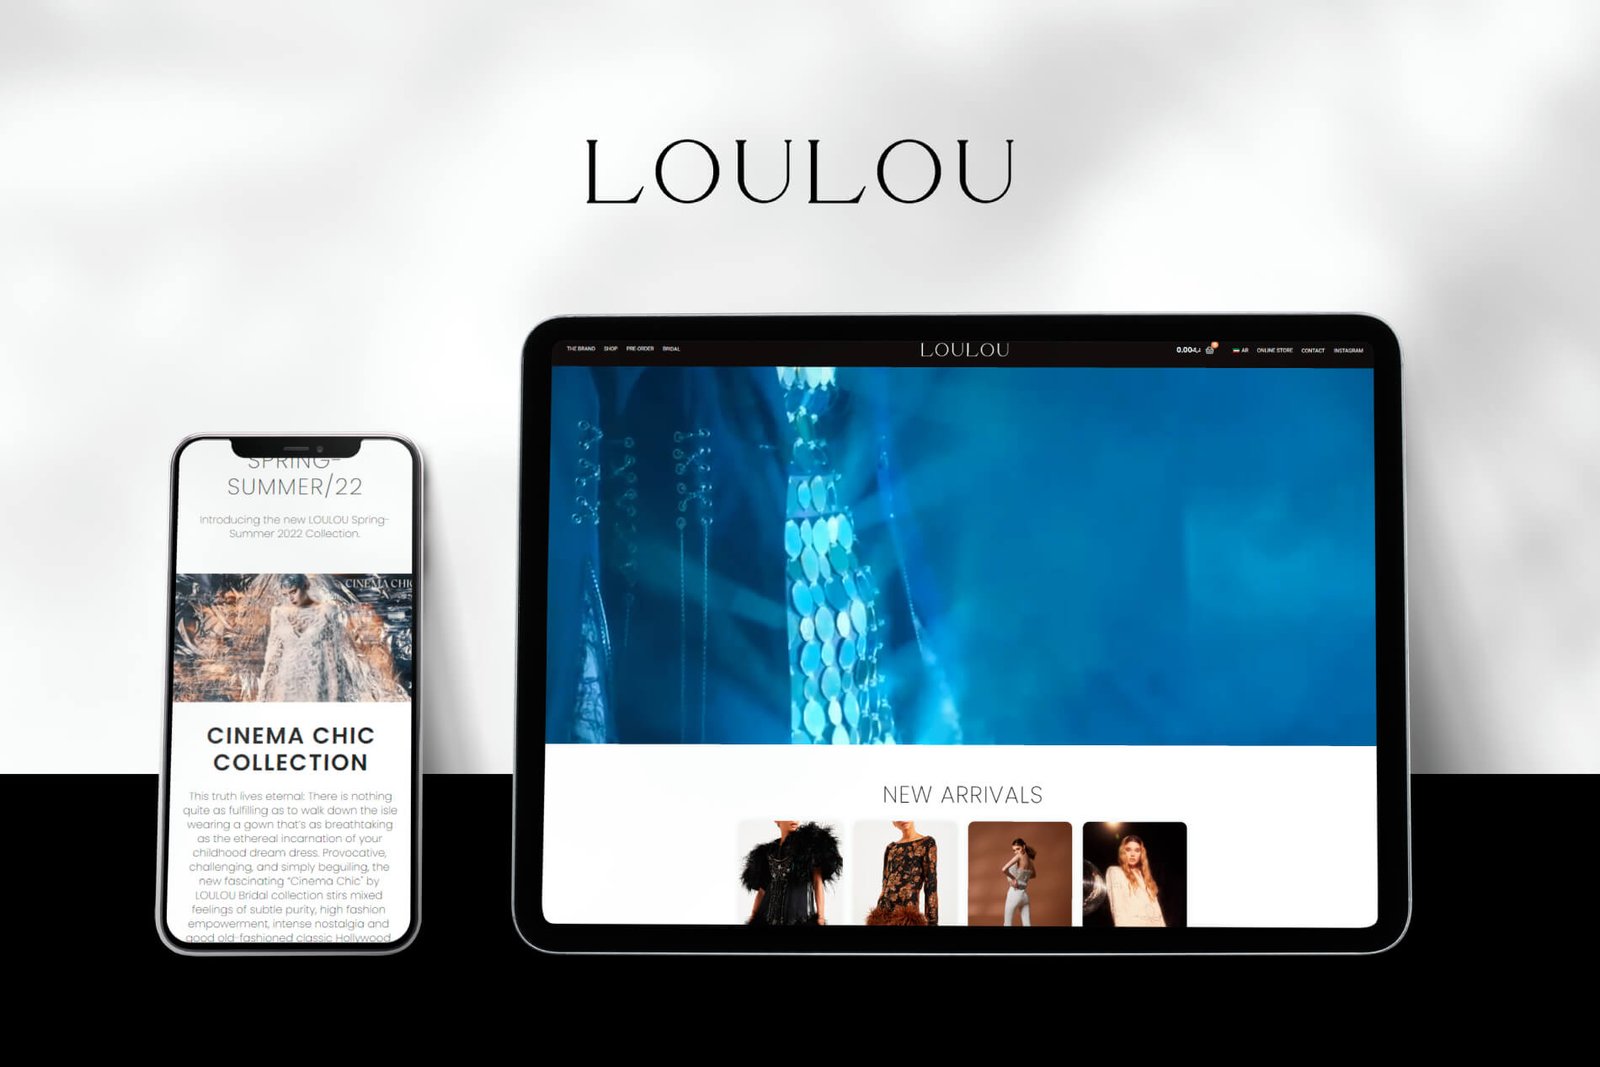 Loulou the brand